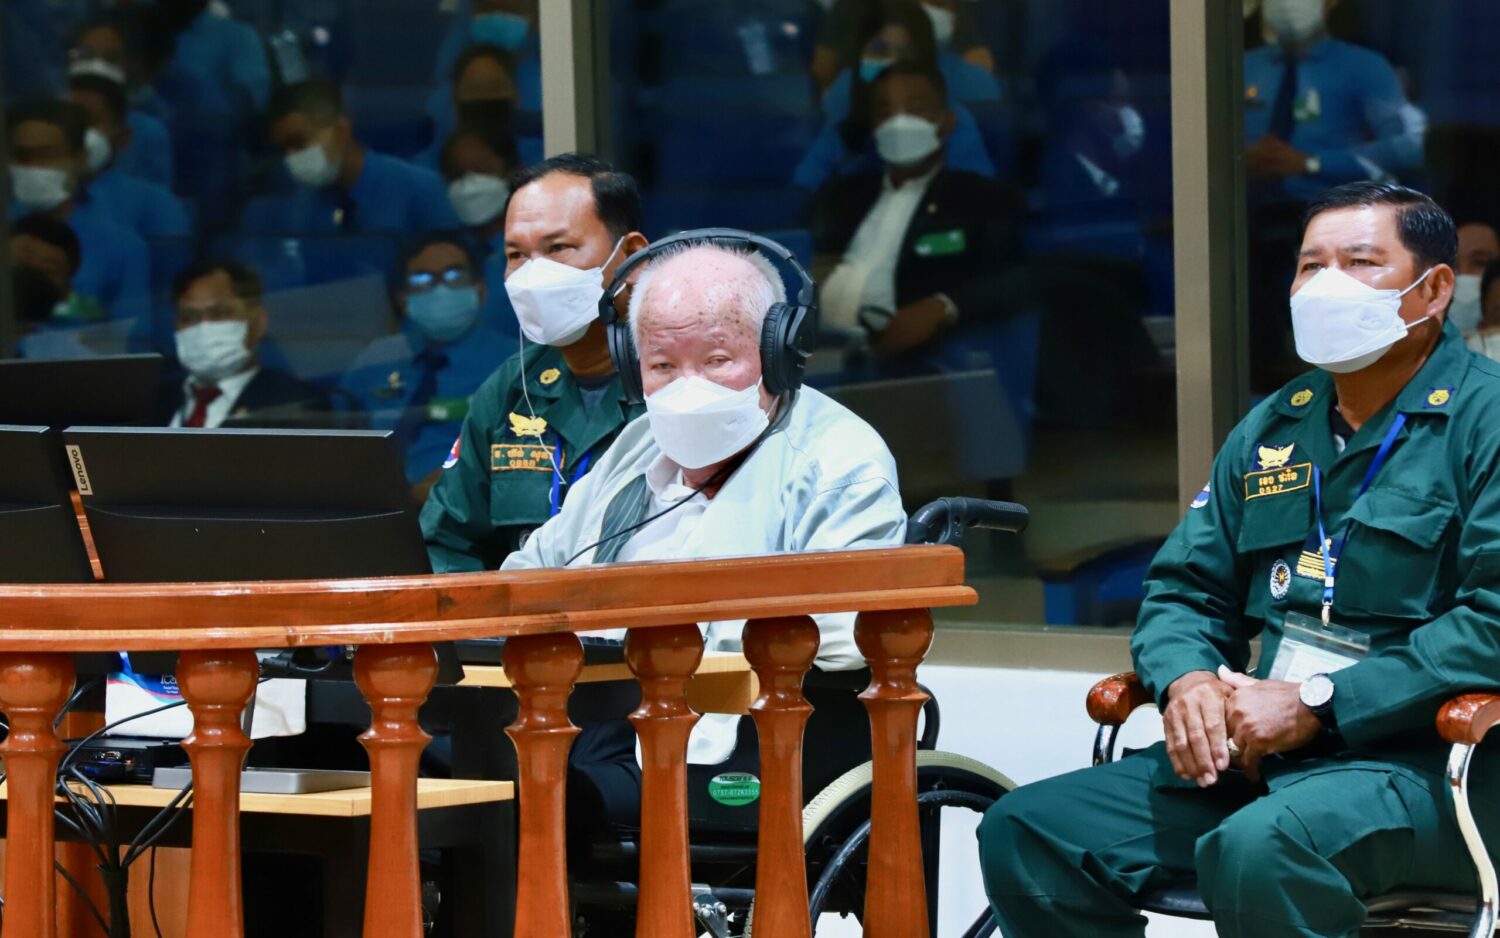 Former Khmer Rouge head of state Khieu Samphans listens to a verdict in an appeal filed by him at the Extraordinary Chambers in the Courts of Cambodia on September 22, 2022. (Nhet Sokheng/ECCC)